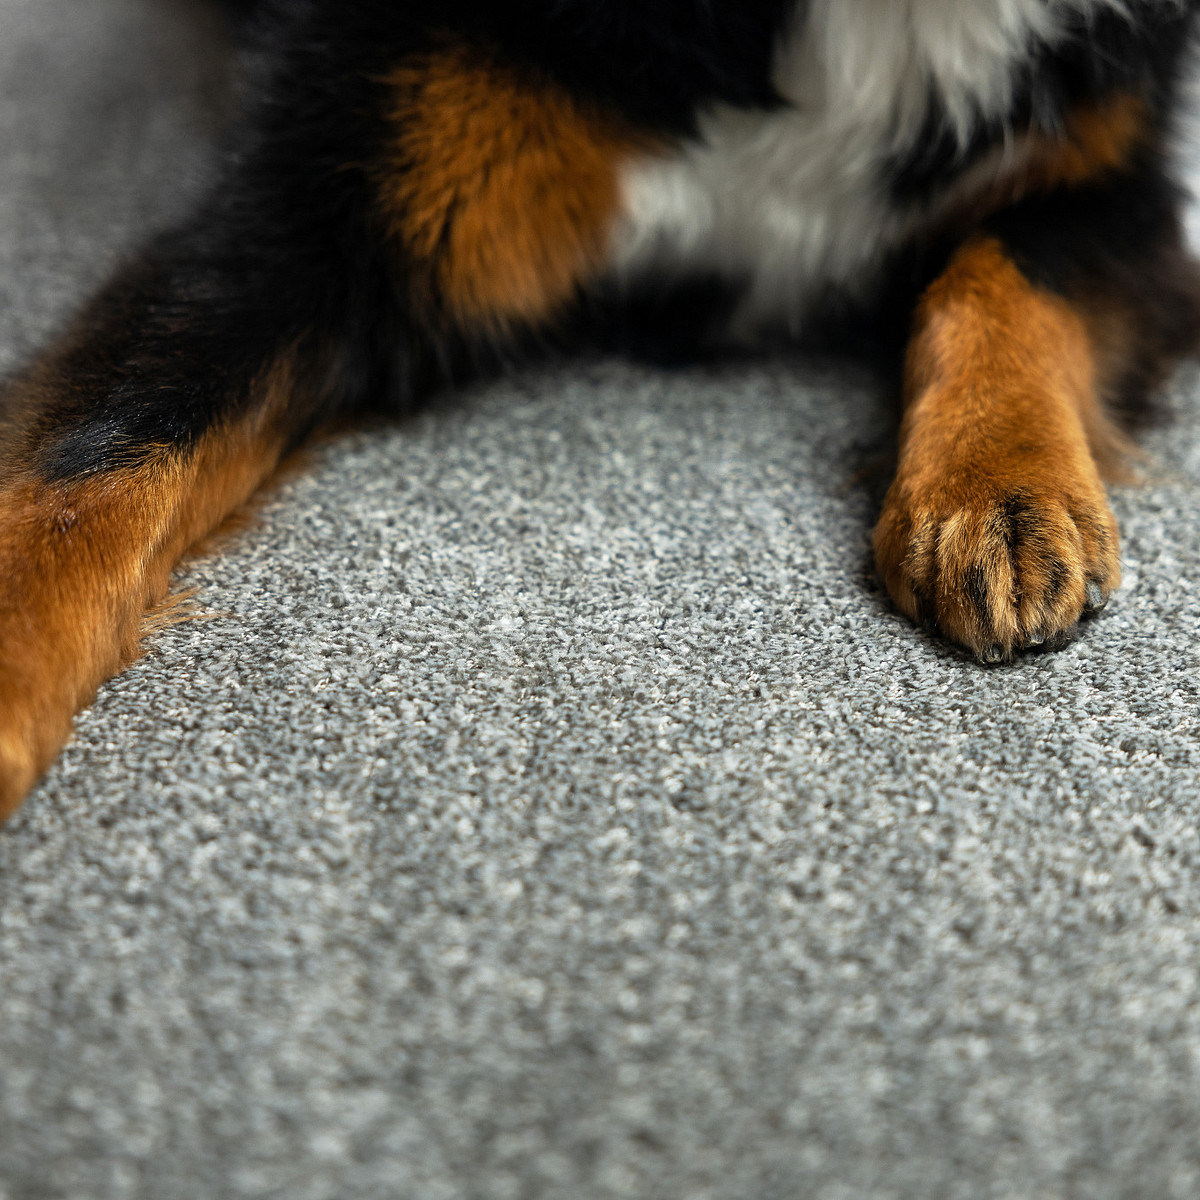 Pet-Friendly Rugs Guide - Beautiful Carpets for Animals